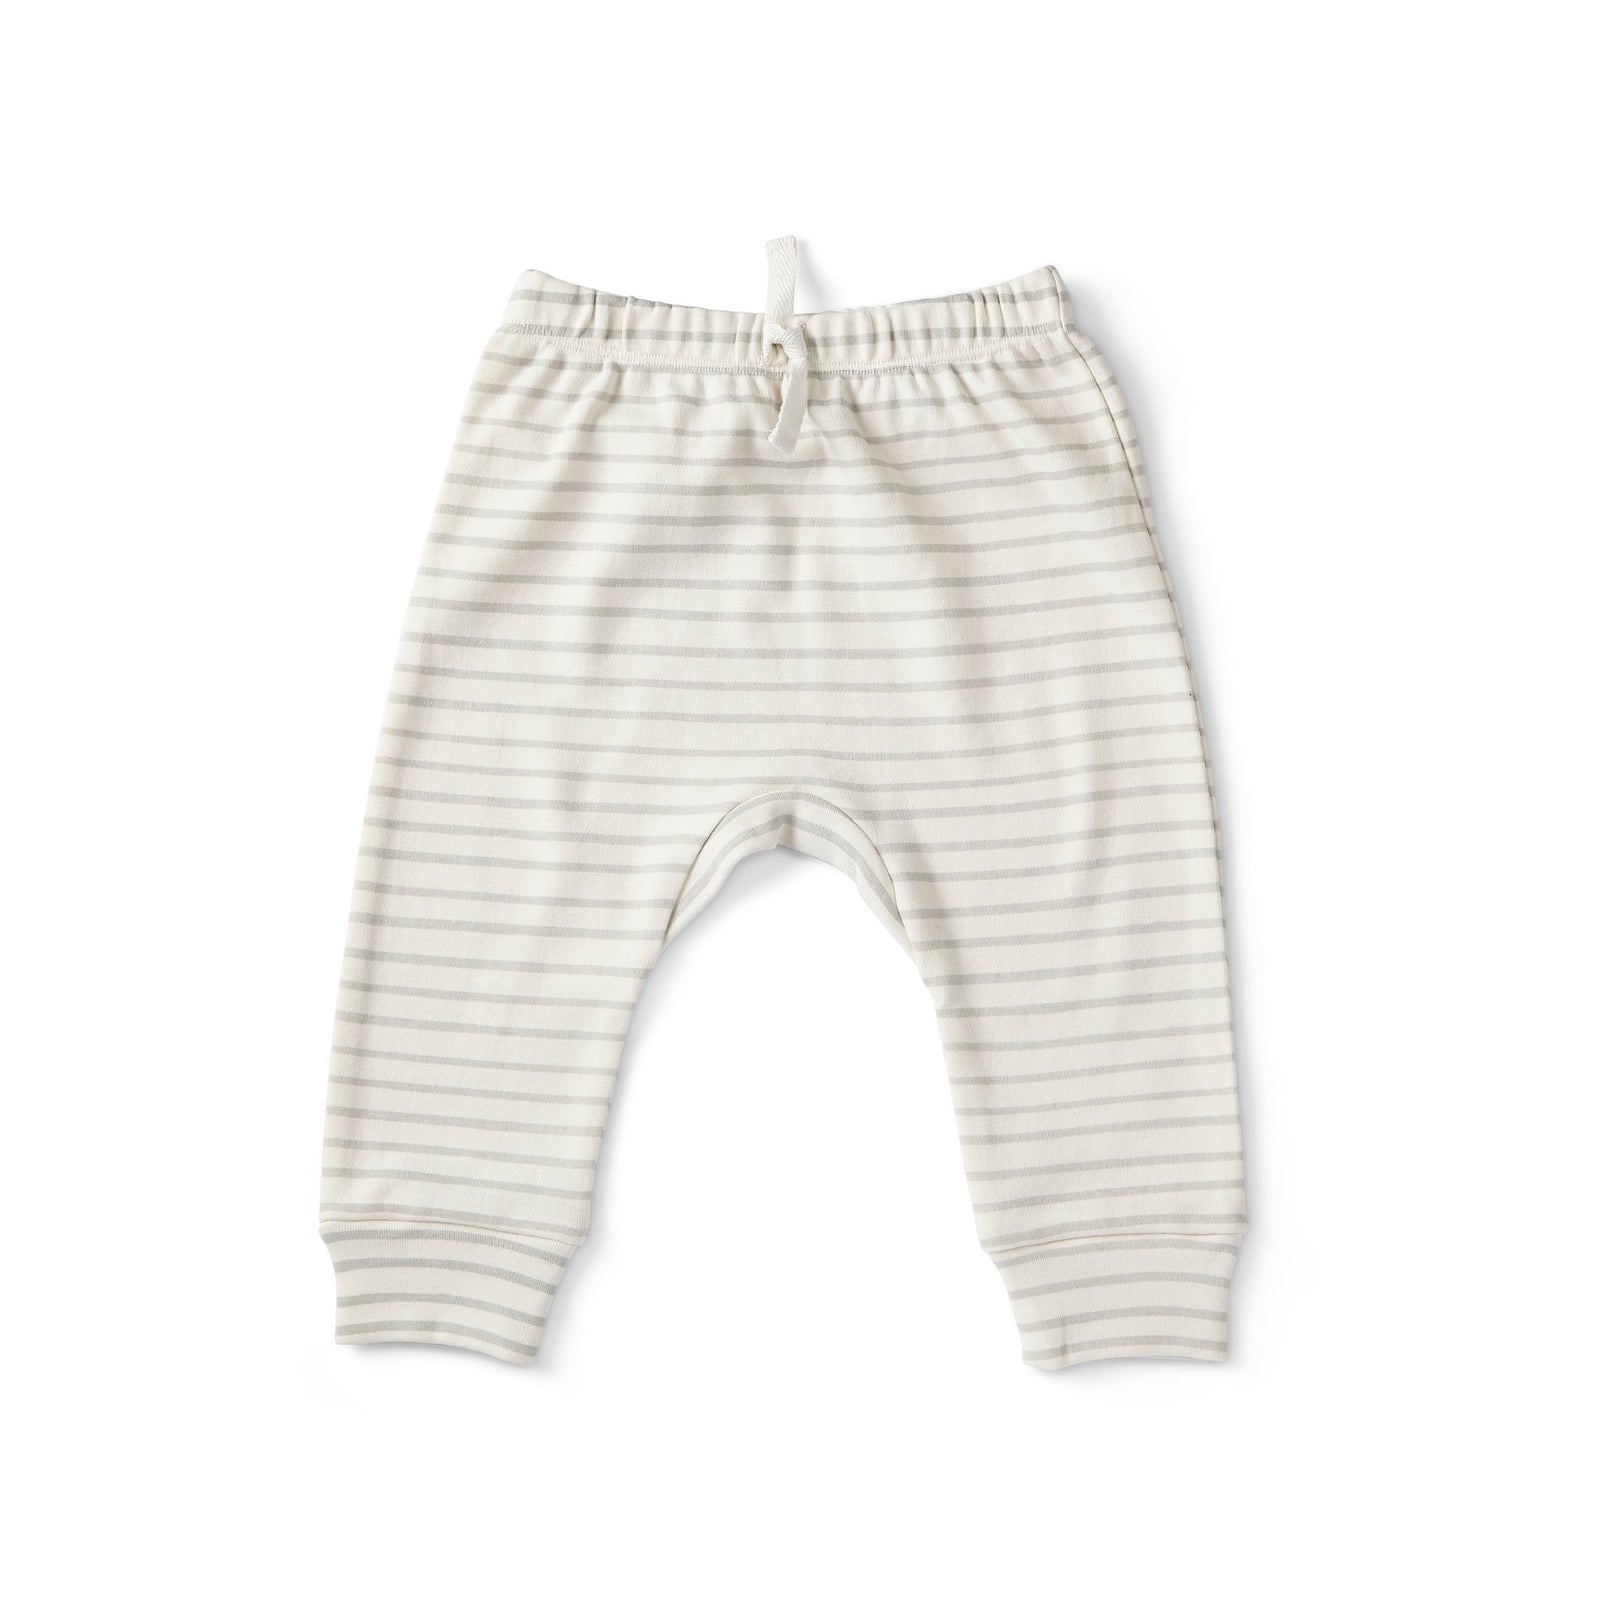 Pehr Pebble Organic Harem Pant. GOTS Certified Organic Cotton & Dyes. White with light grey stripes.